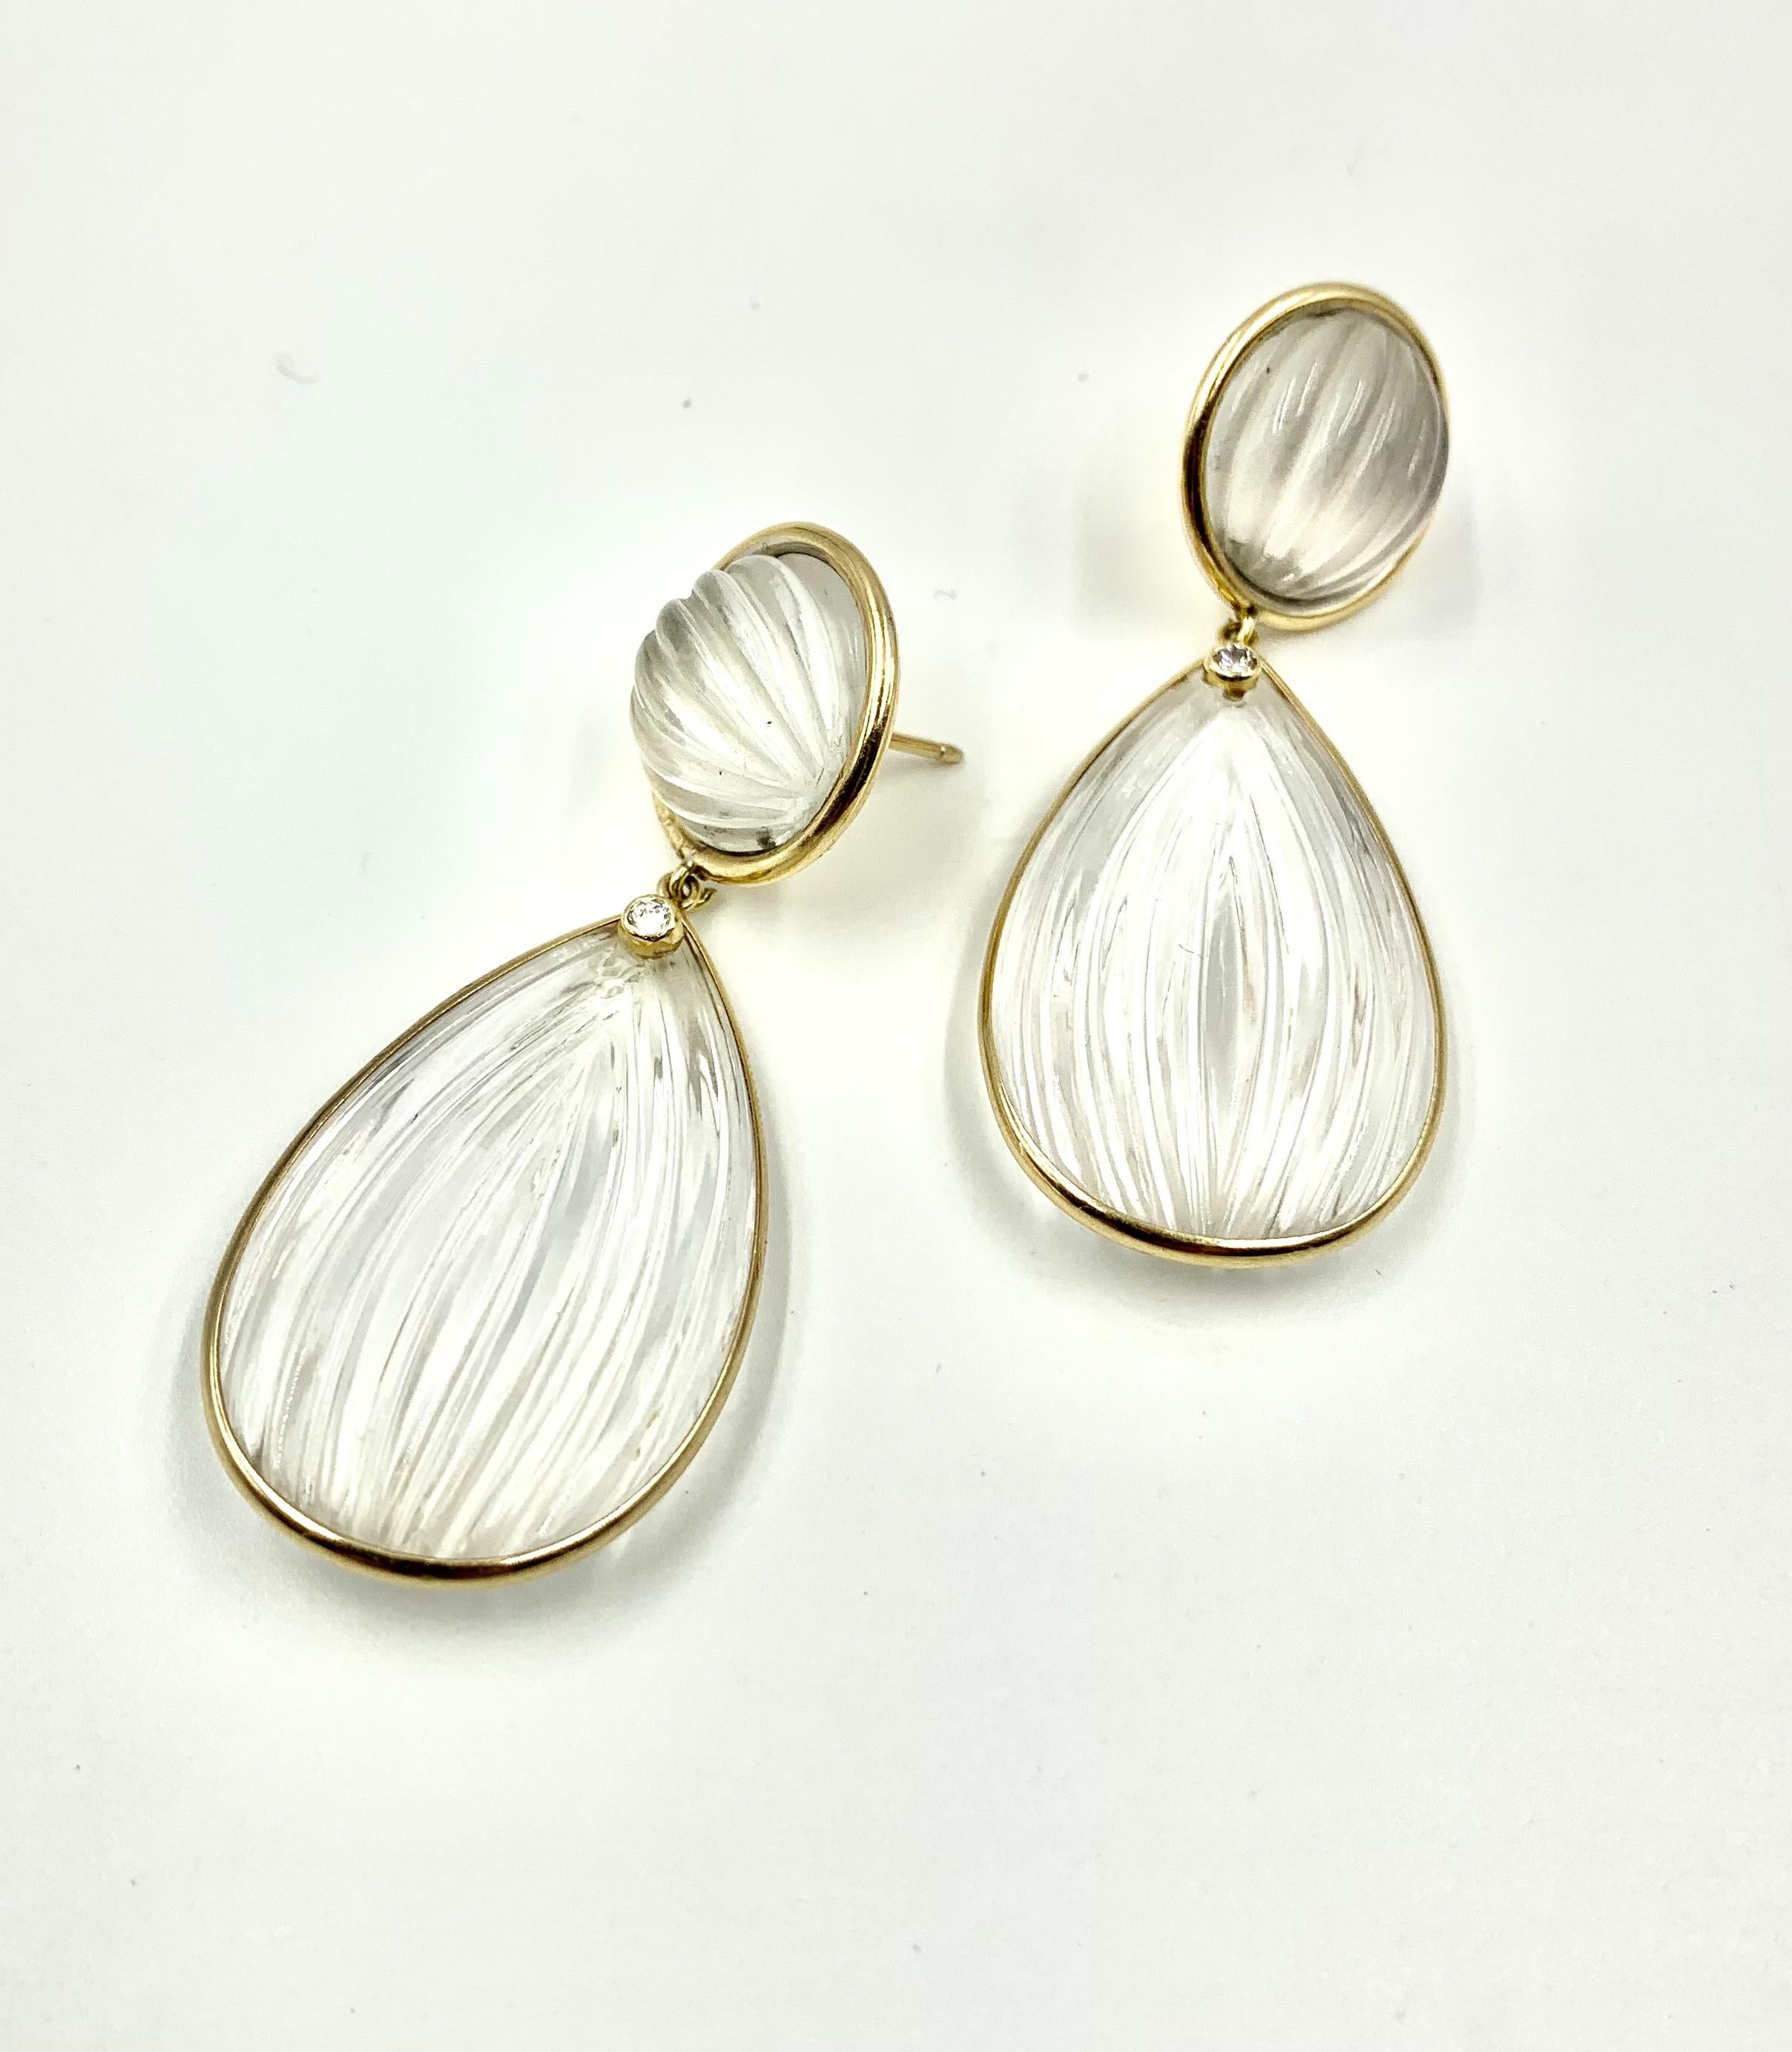 Lovely, large fluted rock crystal, diamond, 14K yellow gold statement earrings in the Classical Roman style.
Estate sourced, circa 1980's.
Wonderful dramatic scale, just over 2 inches in length
Post backs
Tested for 14K gold
Very good condition, one